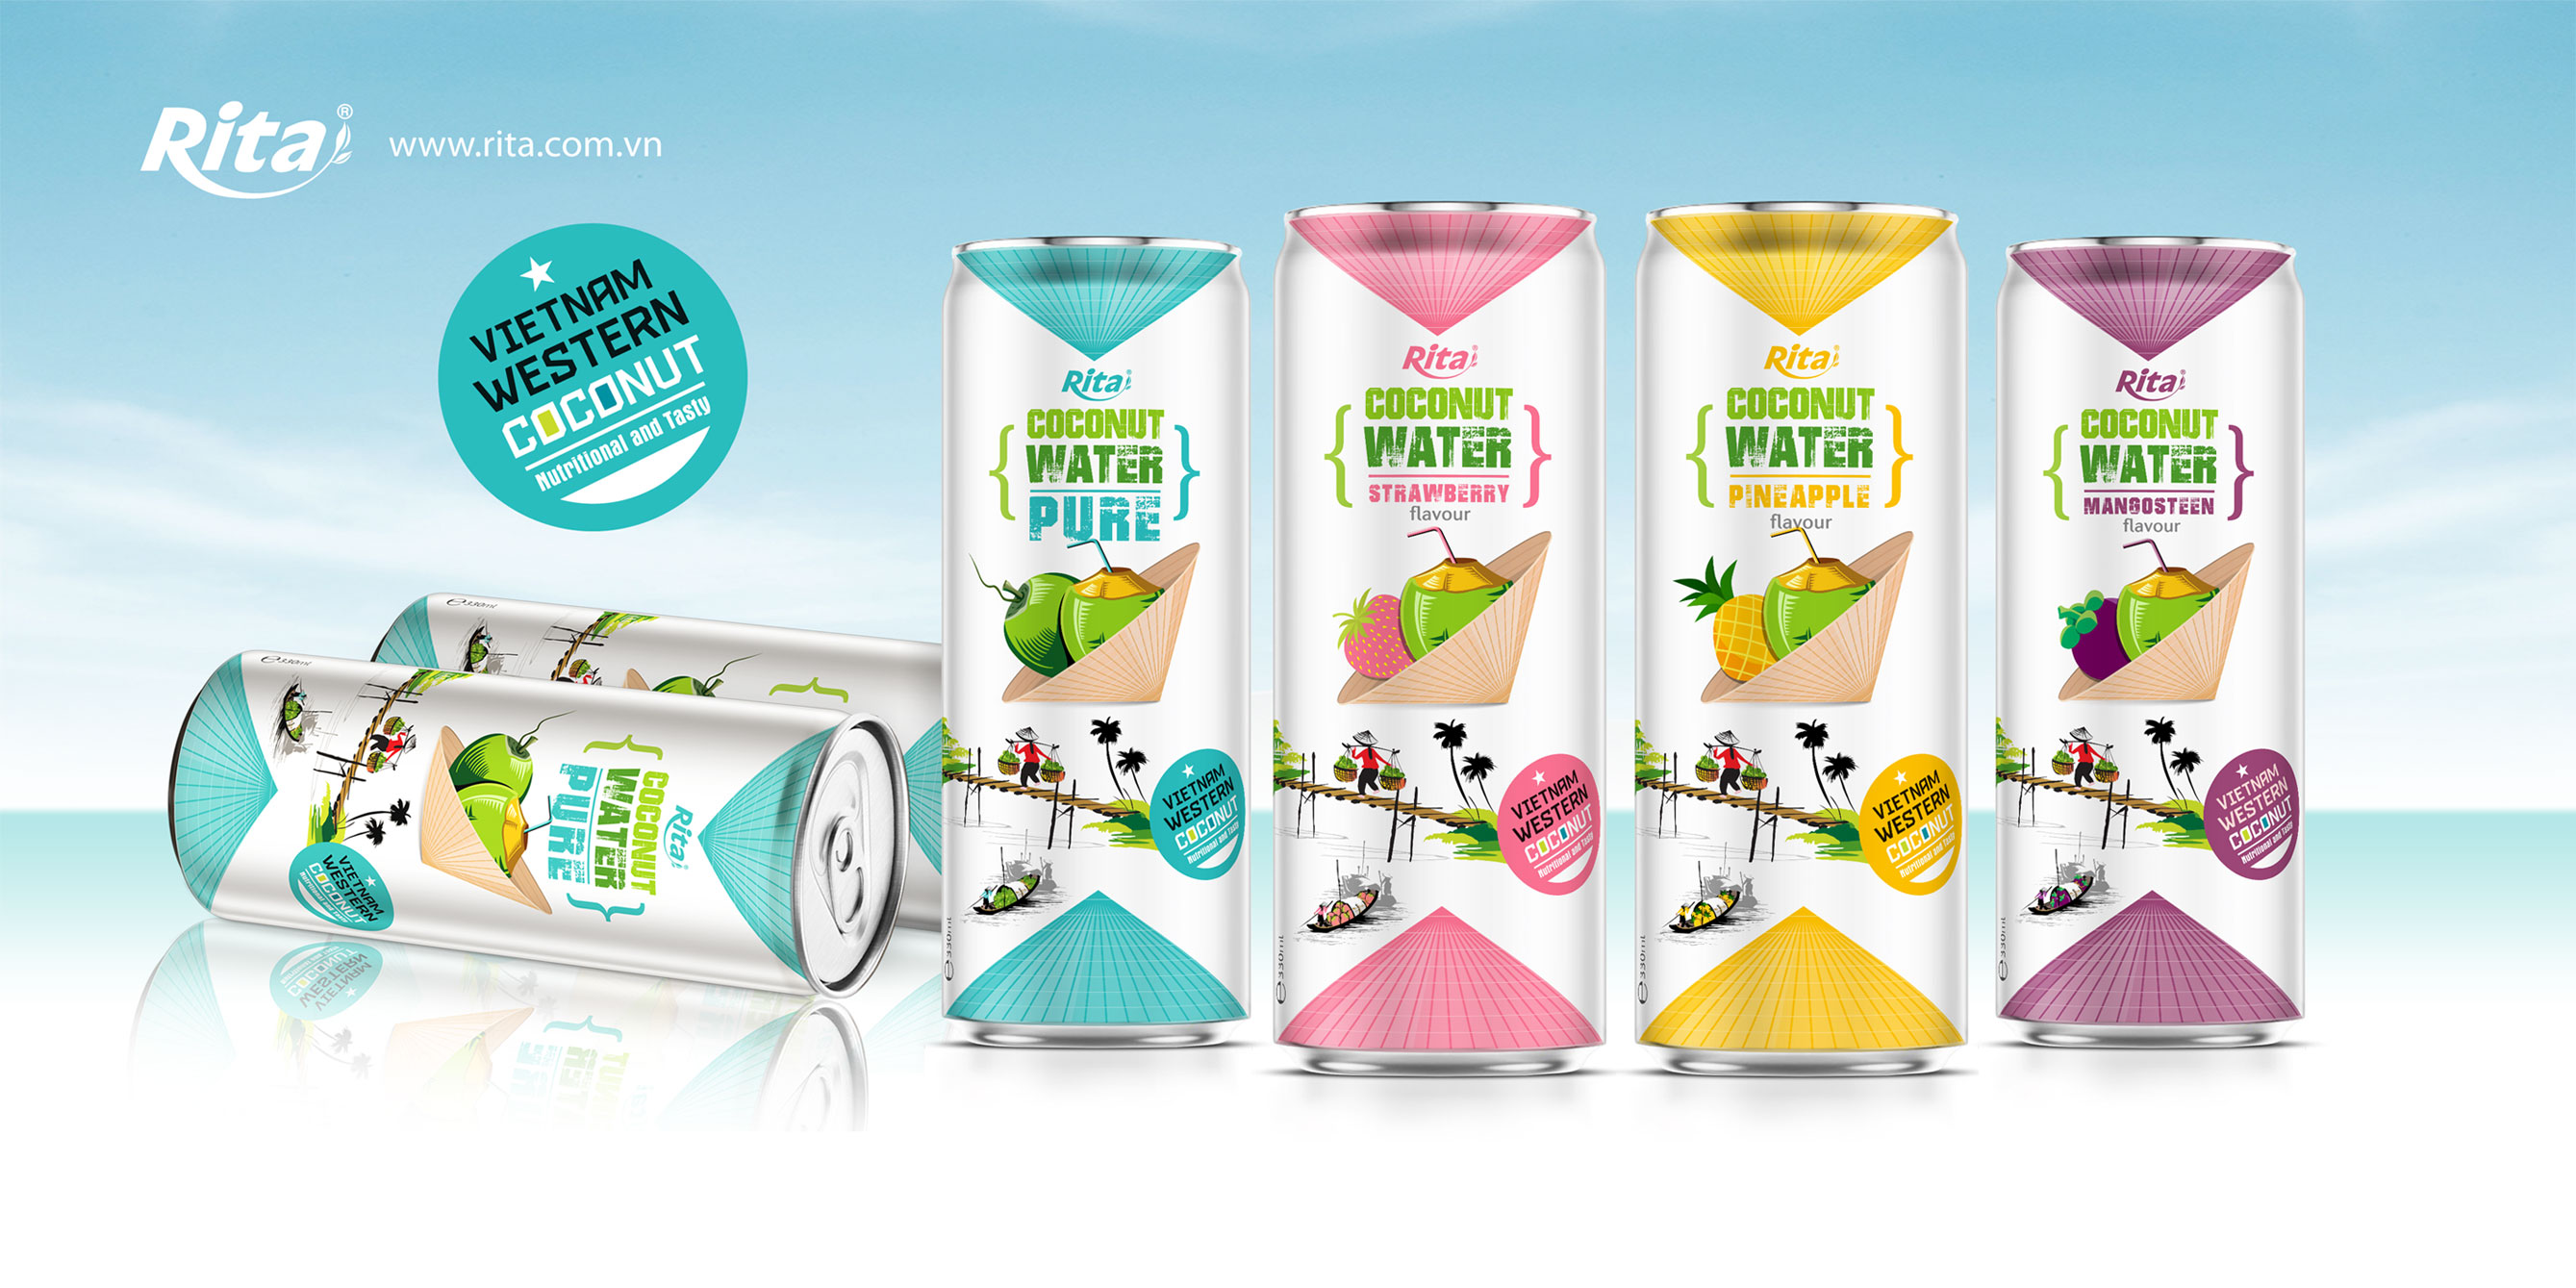 poster coconut water with fruit juice own brand